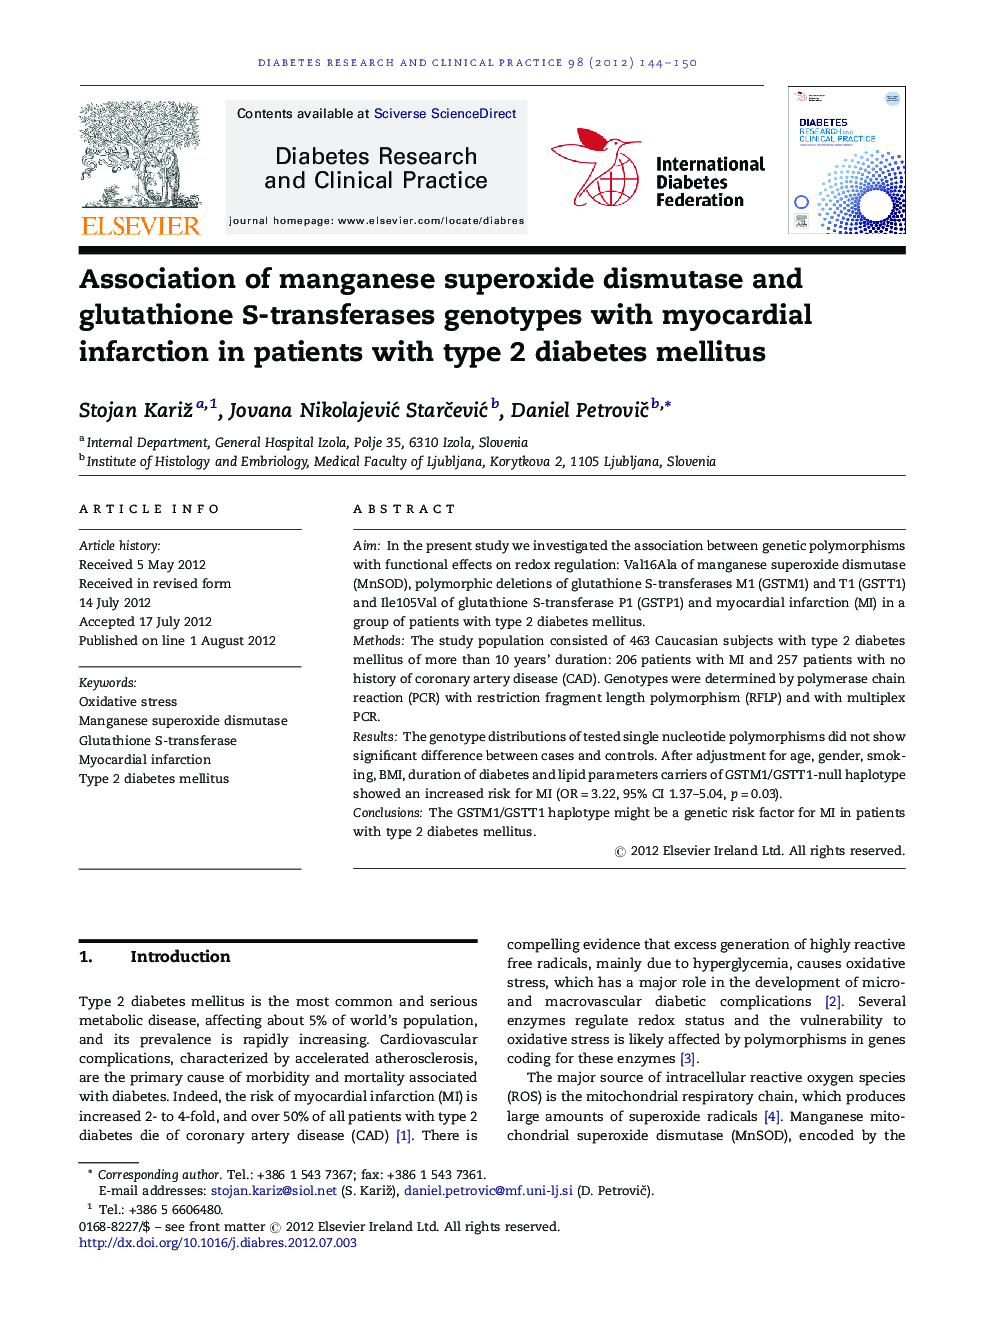 Association of manganese superoxide dismutase and glutathione S-transferases genotypes with myocardial infarction in patients with type 2 diabetes mellitus